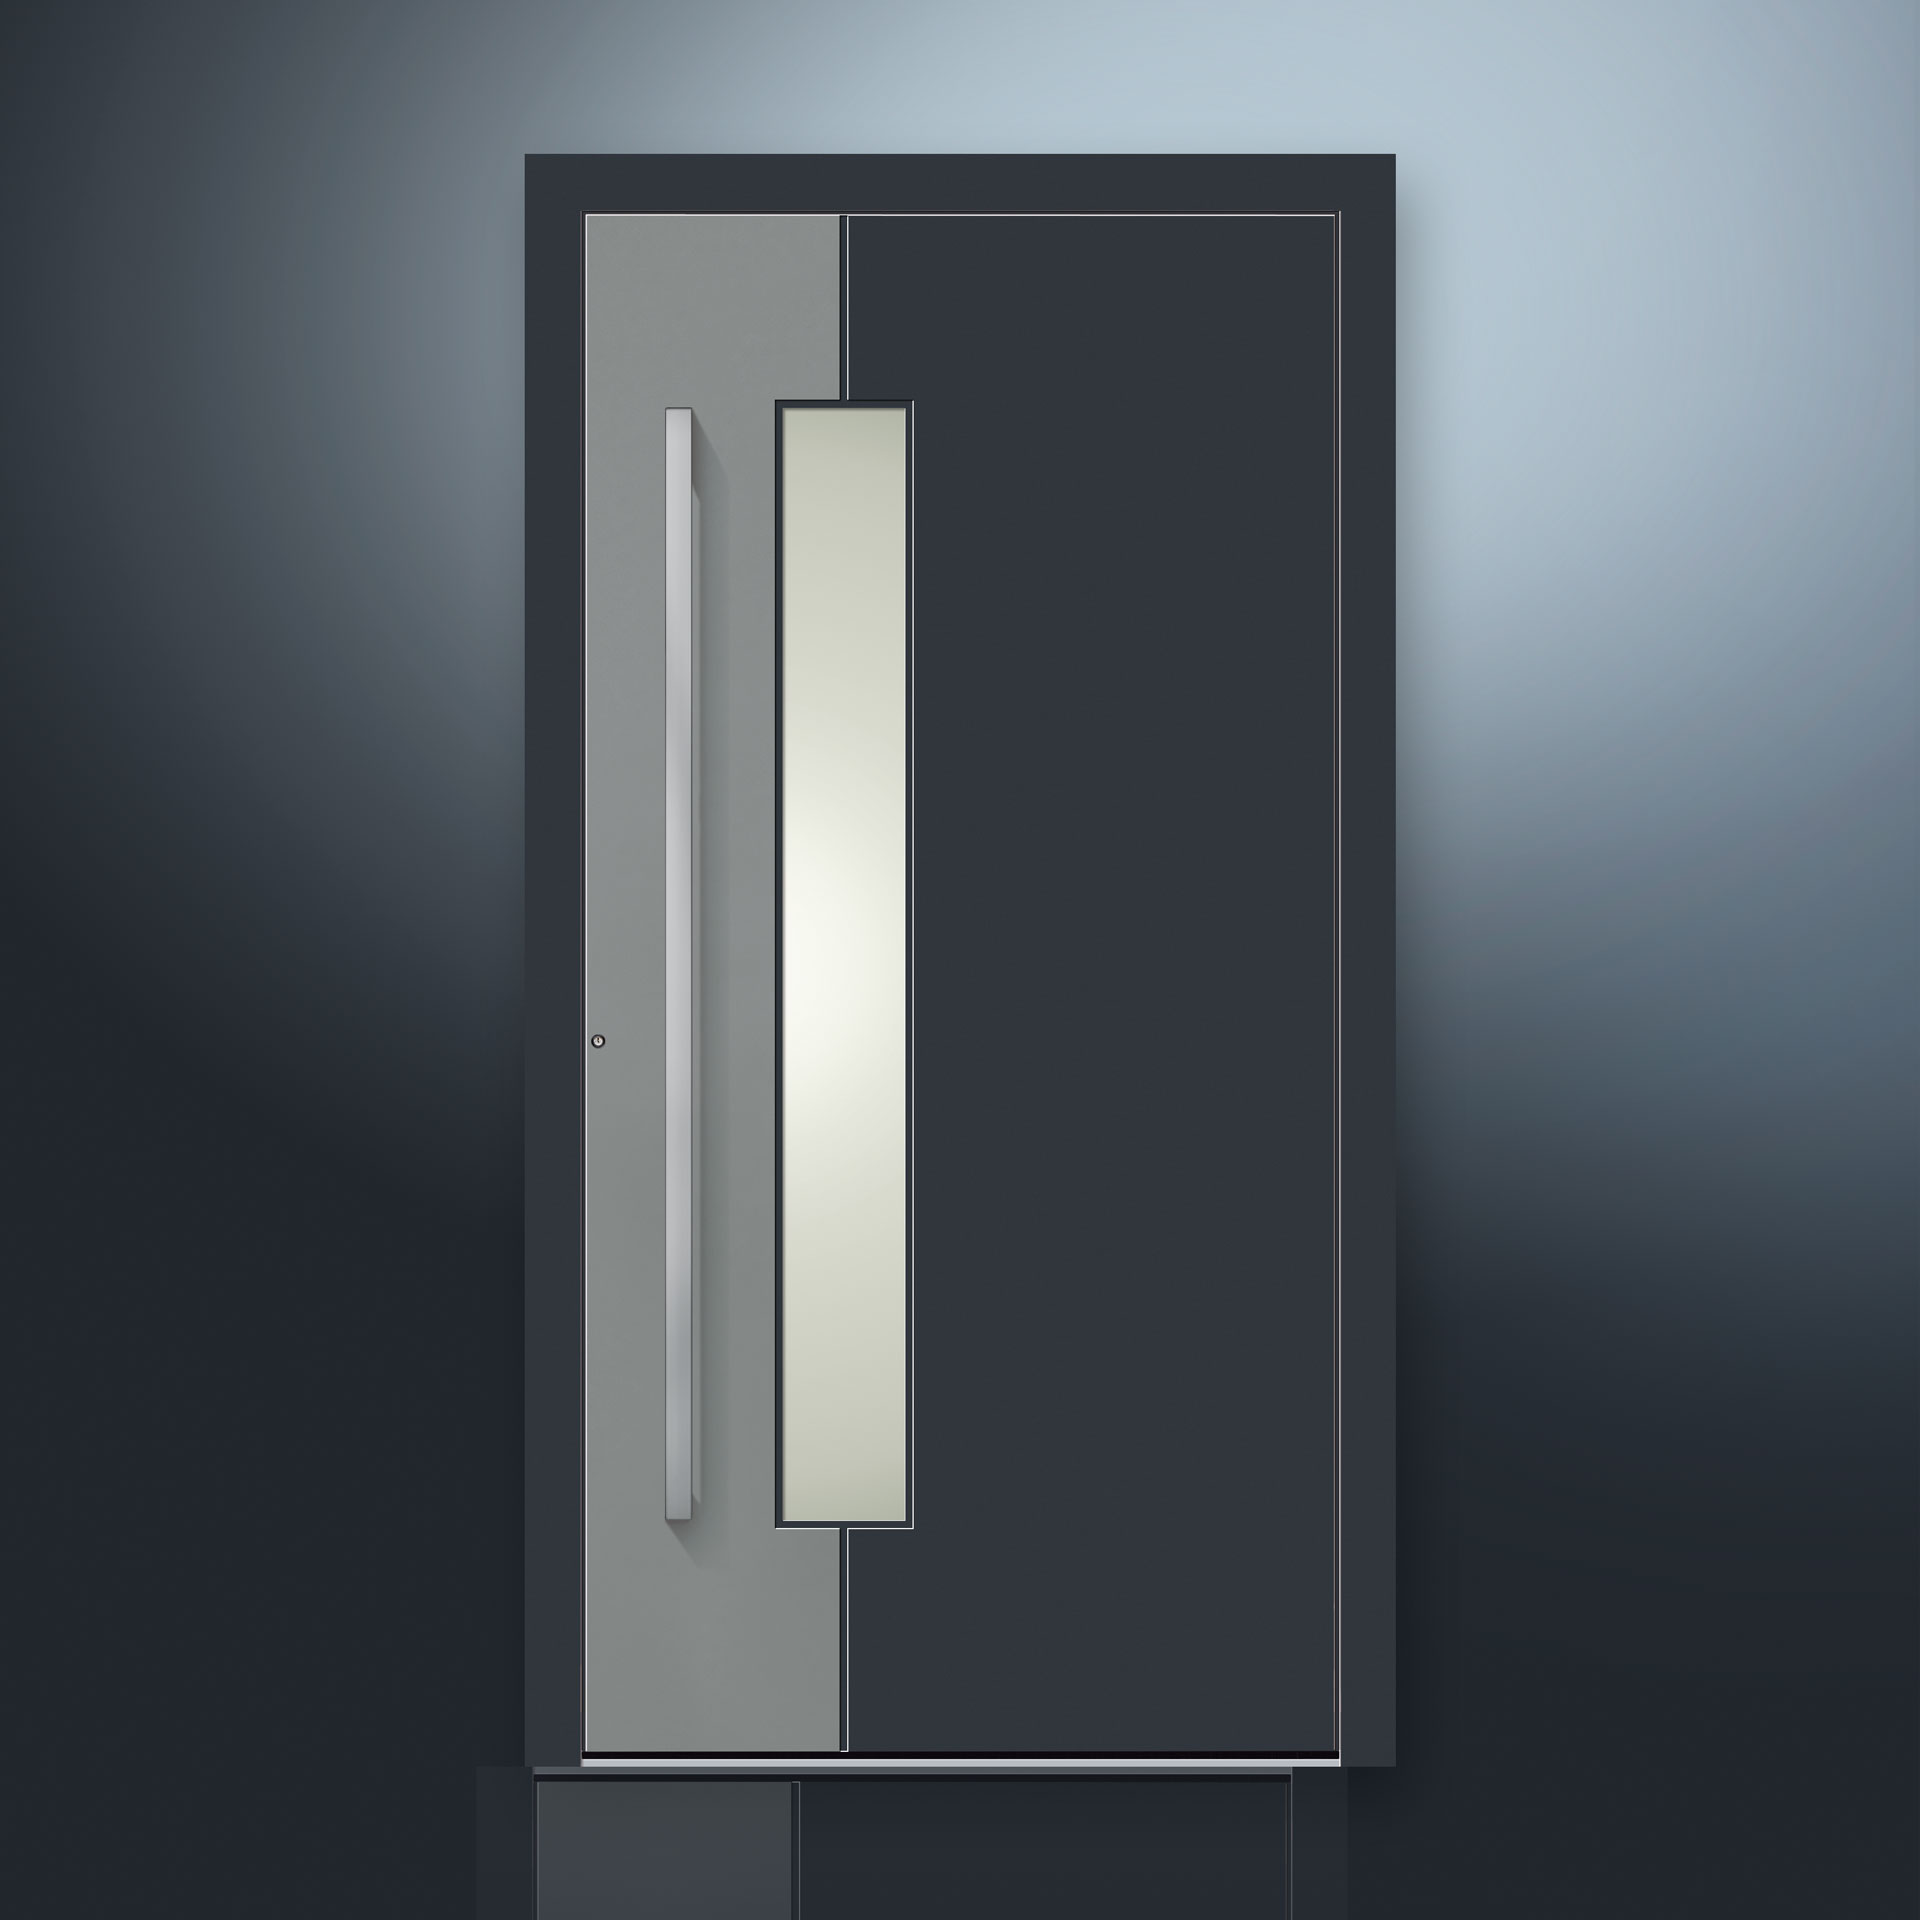 [Translate to EN_GB:] GUTMANN's ALLIGNO wood aluminium door system is in a choice of nine modern standard models available. Because it is made of aluminium this front door leave is weather-resistant, durable and maintenance friendly.